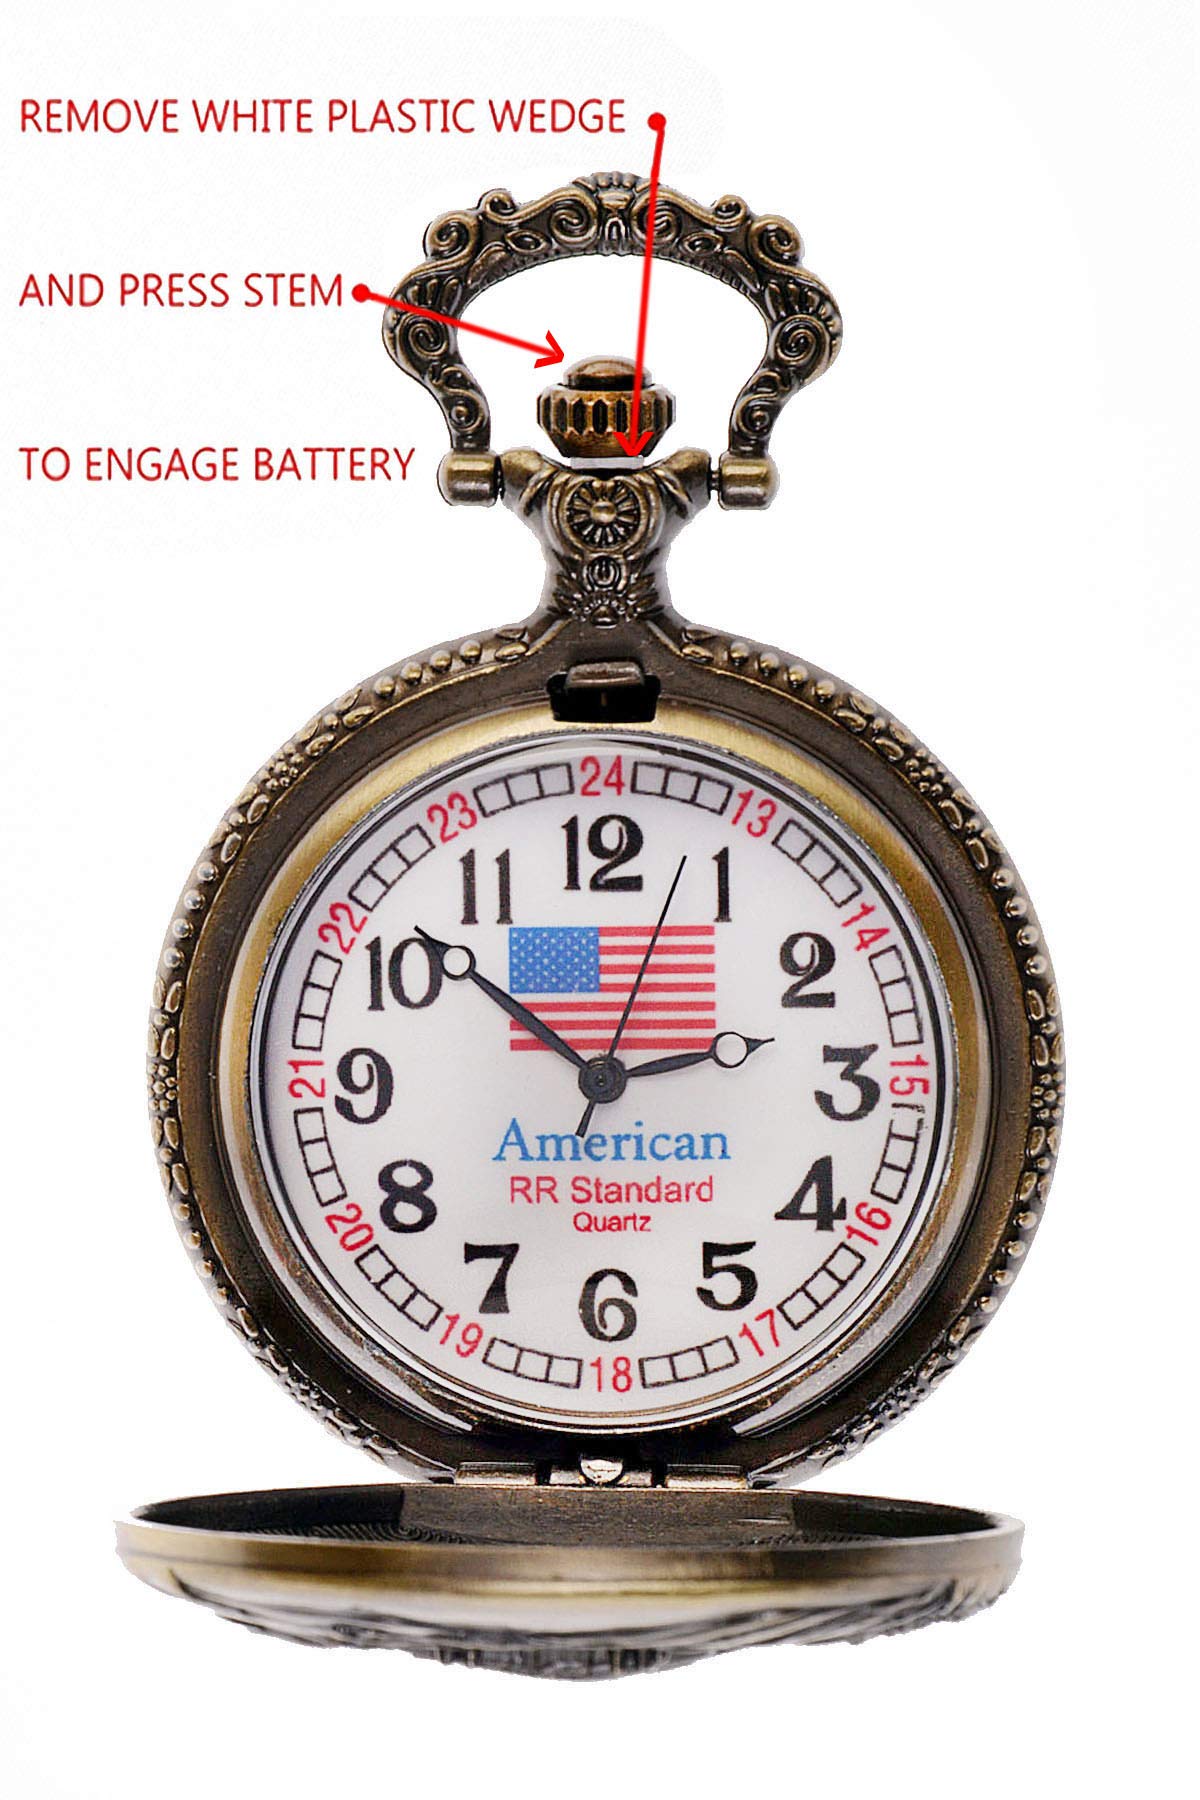 Pinnacle Awards Canada Railroad Regulation Pocket Watch with 2 Chains, Japanese Movement Steam Engine #1